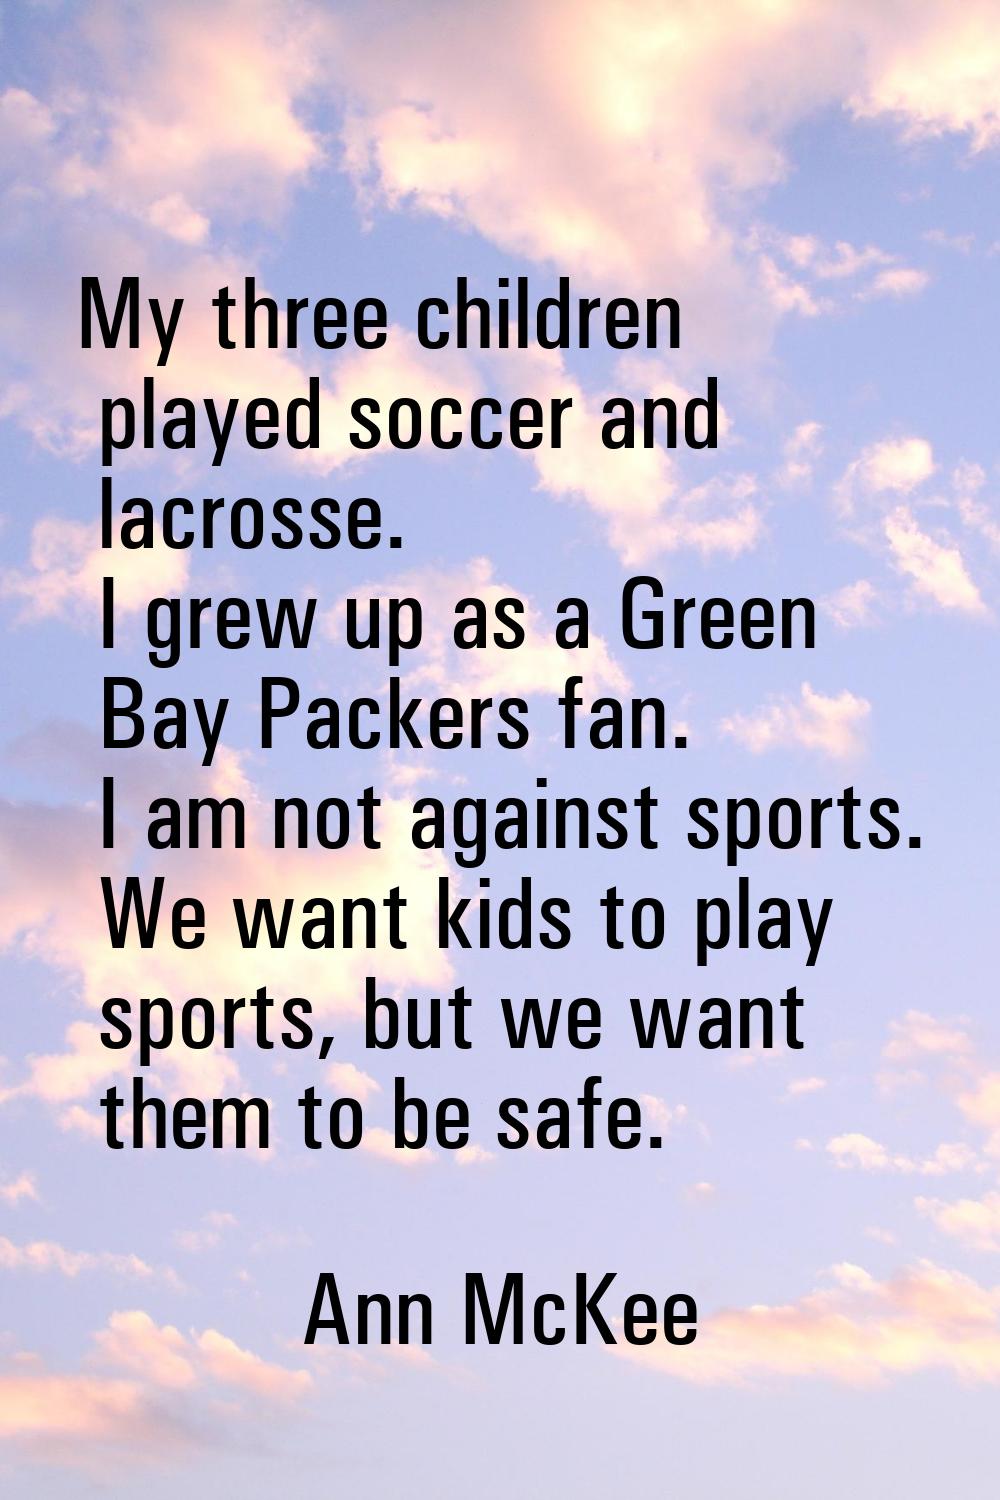 My three children played soccer and lacrosse. I grew up as a Green Bay Packers fan. I am not agains